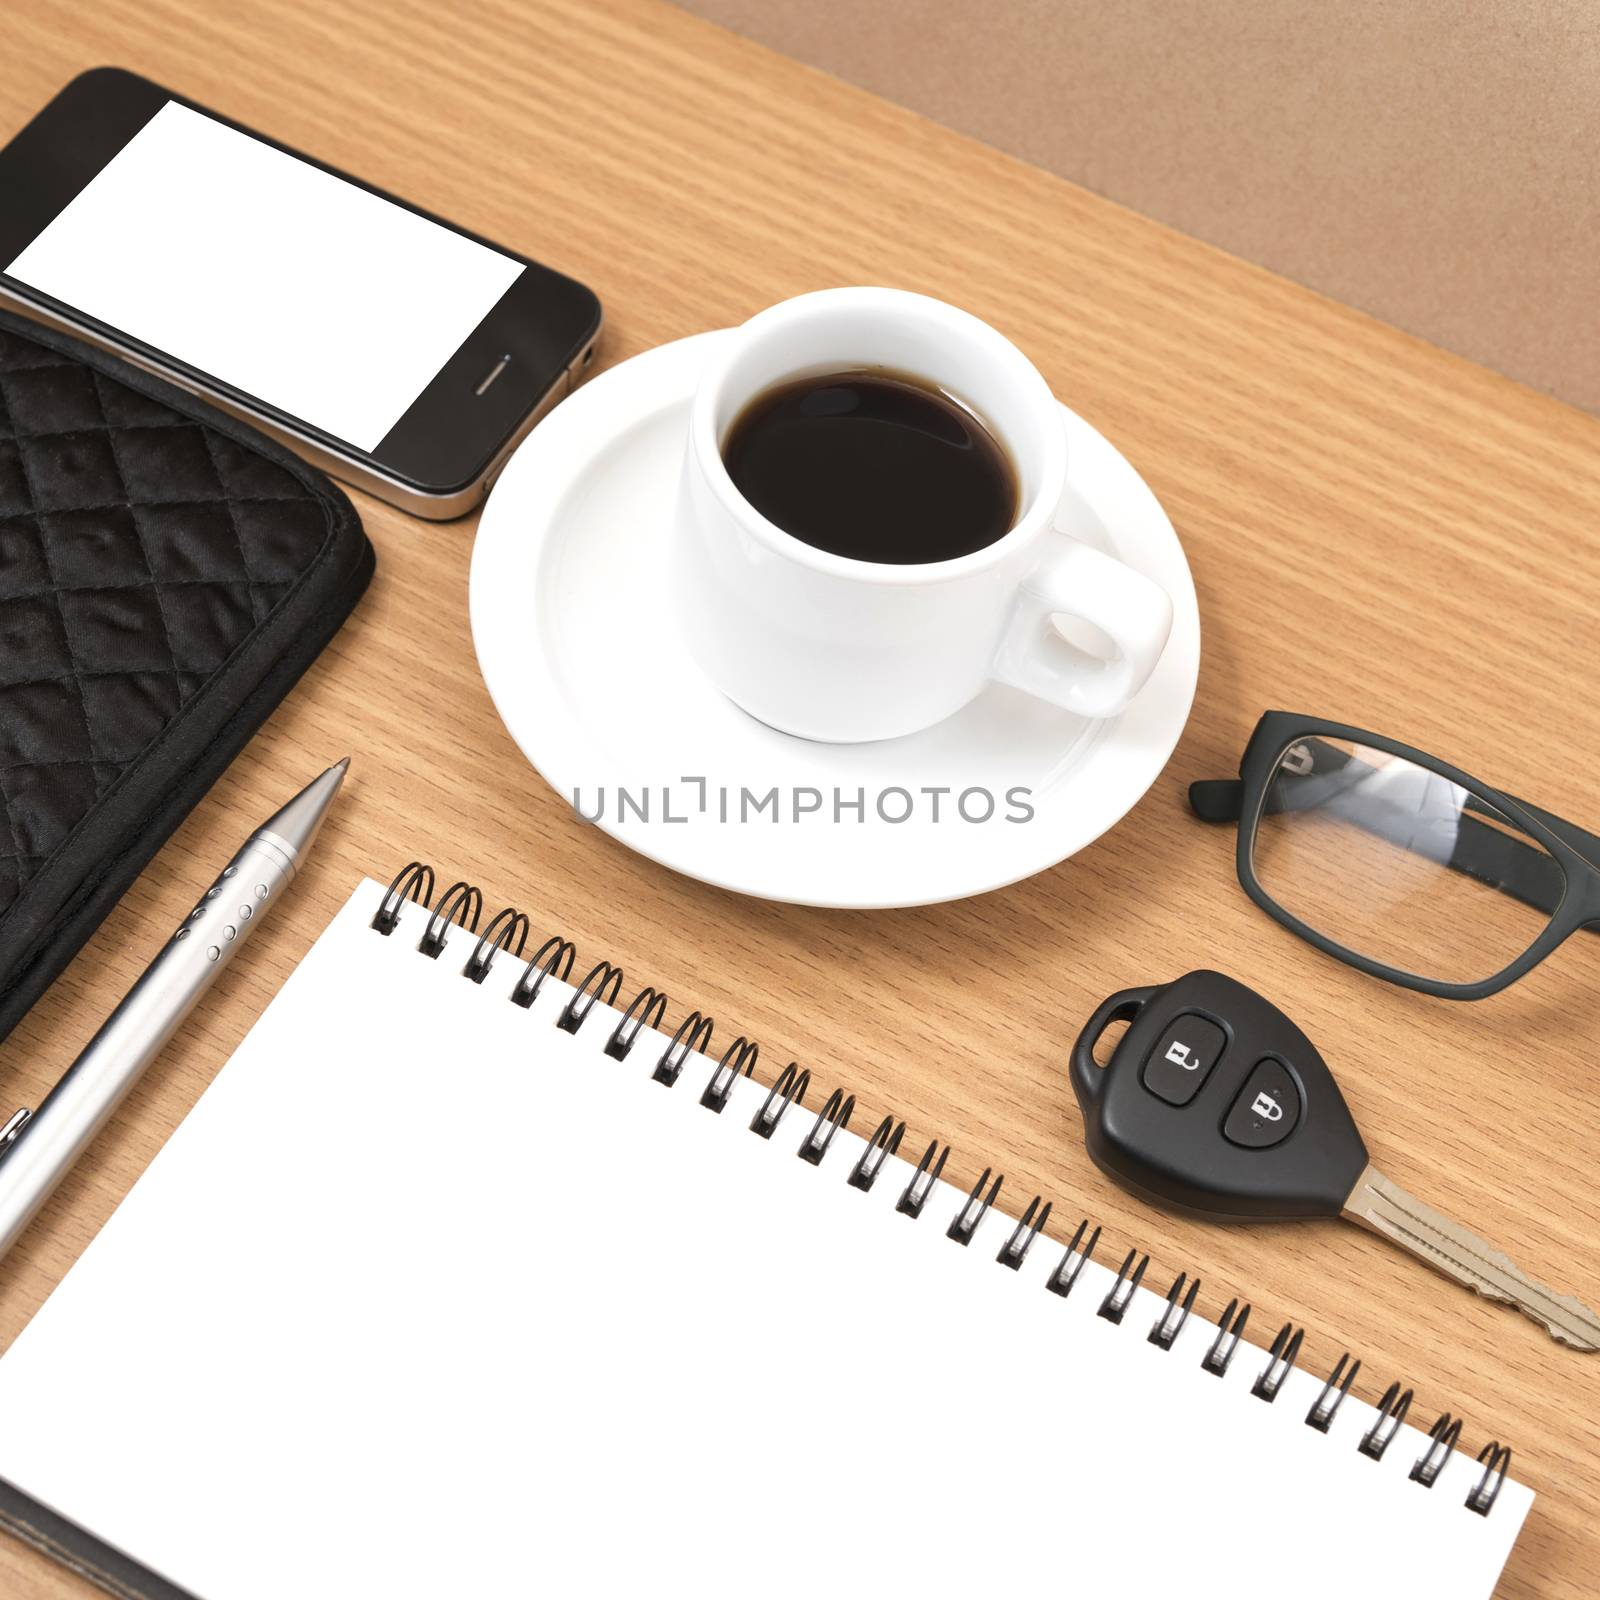 coffee and phone with notepad,car key,eyeglasses and wallet on wood table background